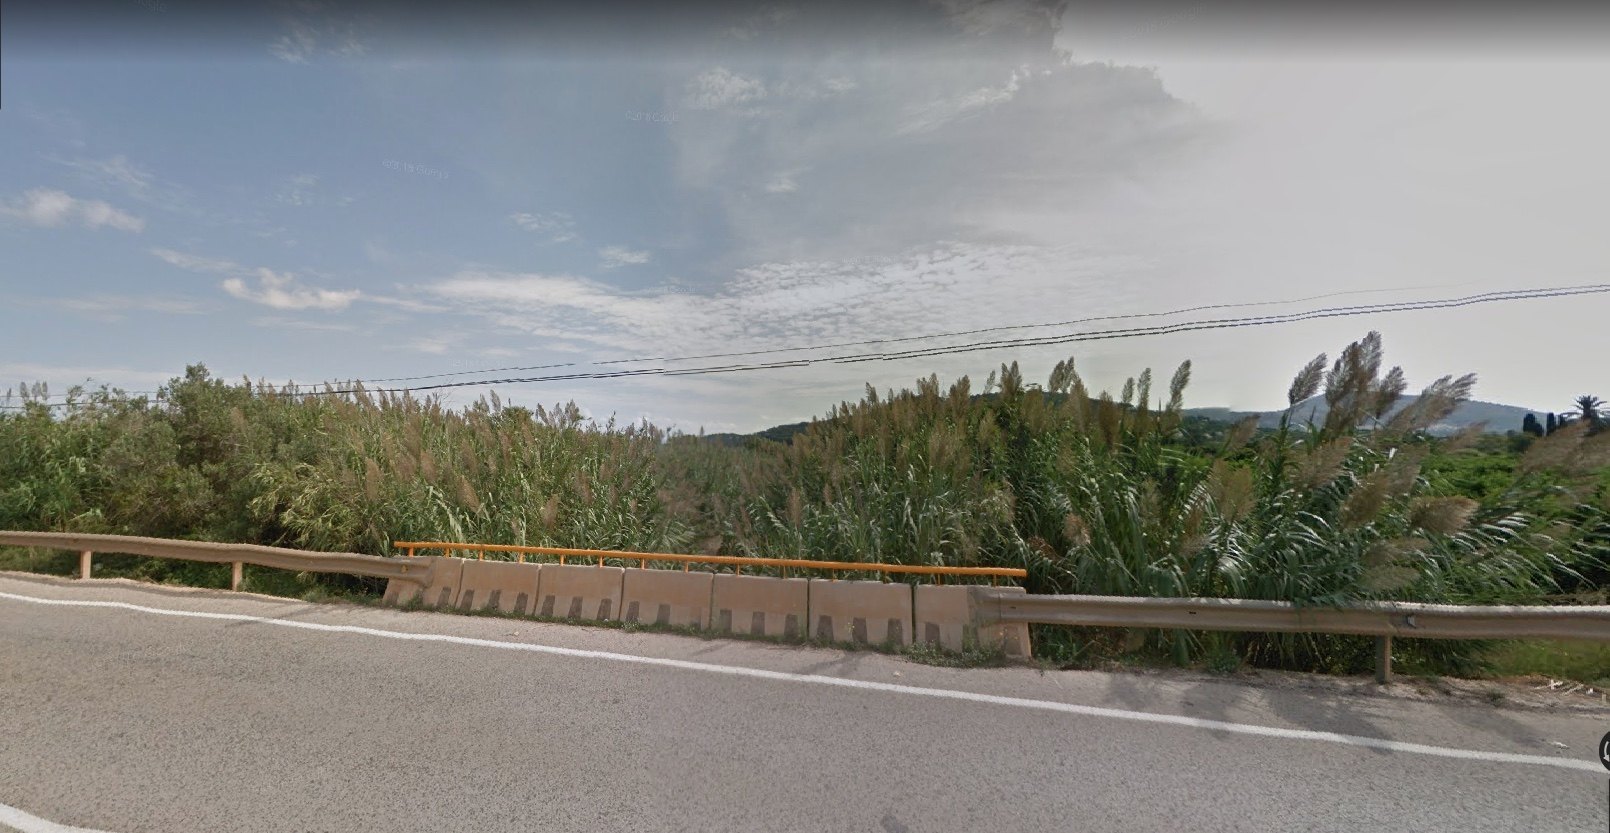 AGRICULTURAL PLOTS FOR SALE IN CATARROGES JAVEA - COSTA BLANCA